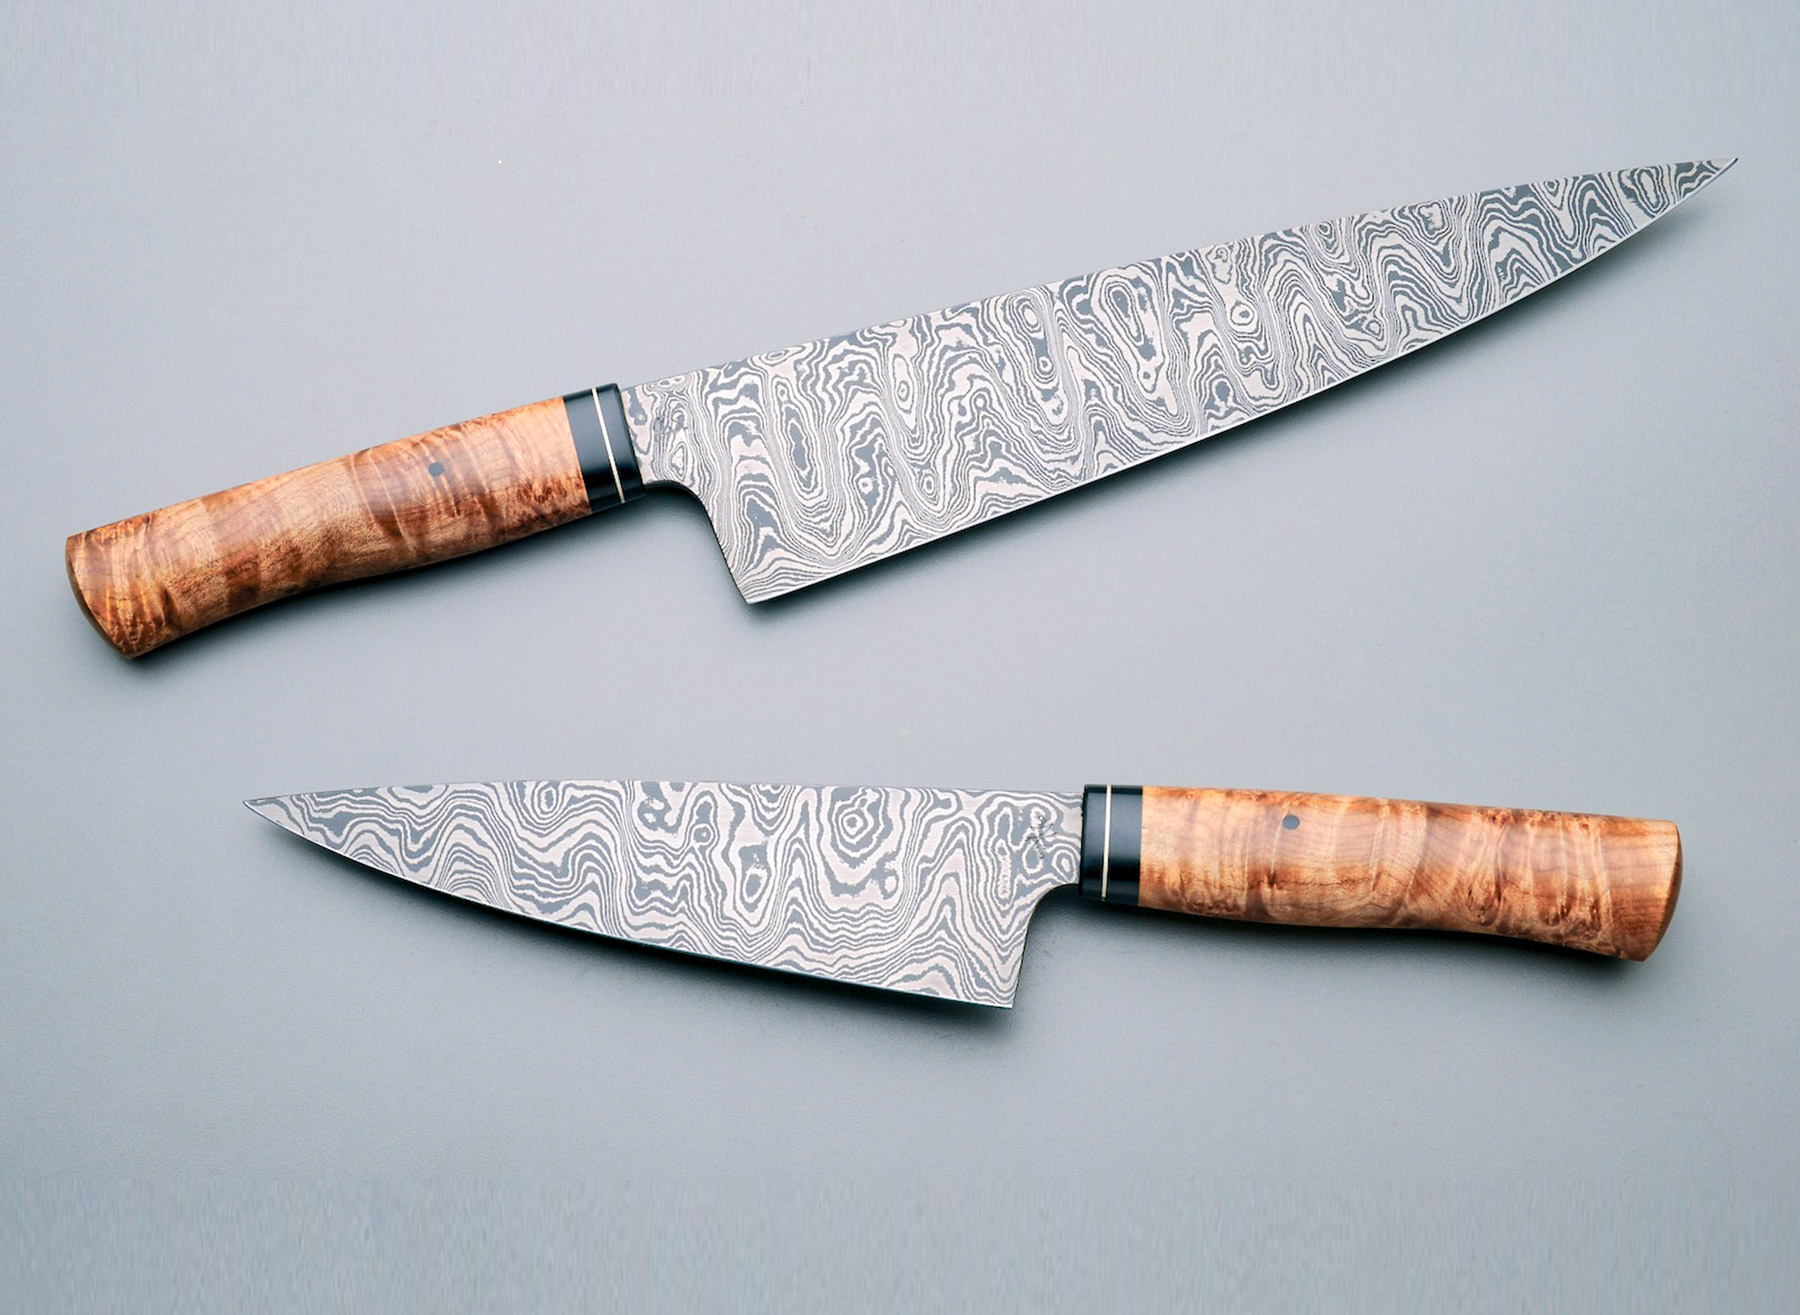 How to Sharpen a Damascus Chef Knife at Home? - Best Damascus